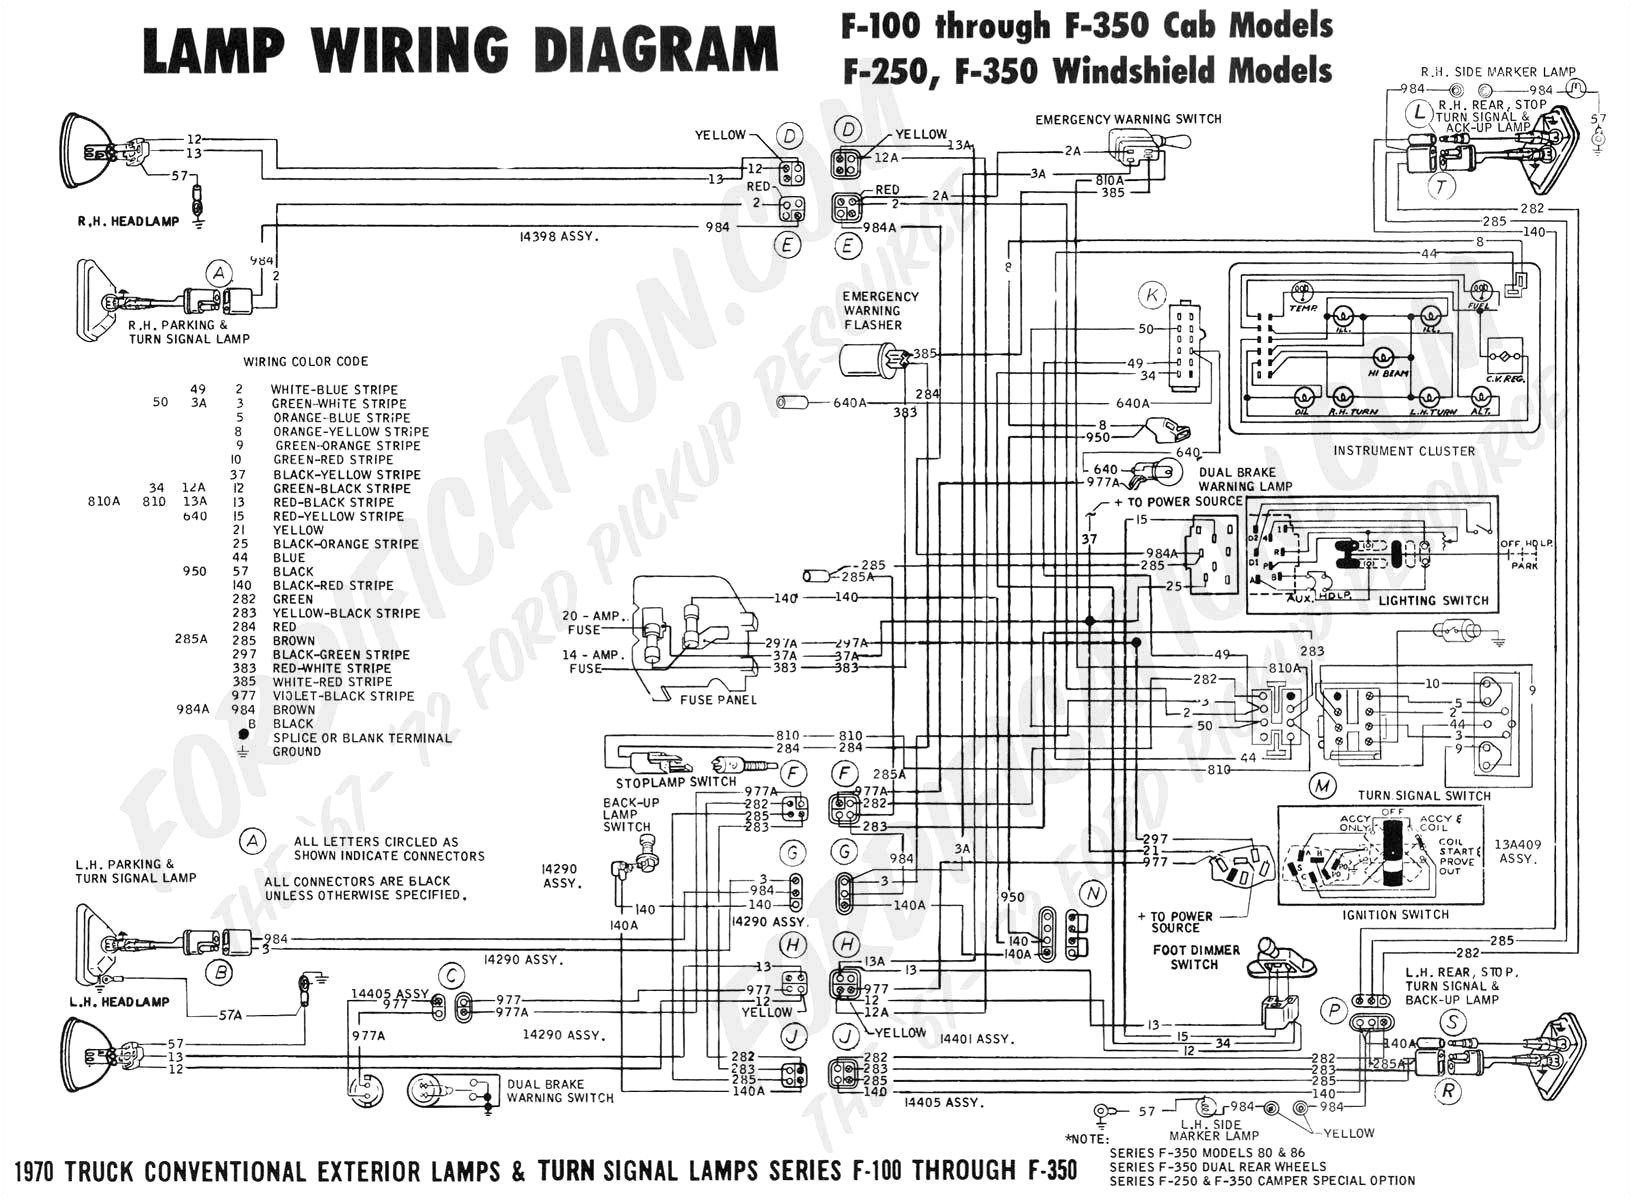 bmw e36 tail light wiring diagram best of inspirational for motorcycle hazard lights 2003 jeep liberty jpg